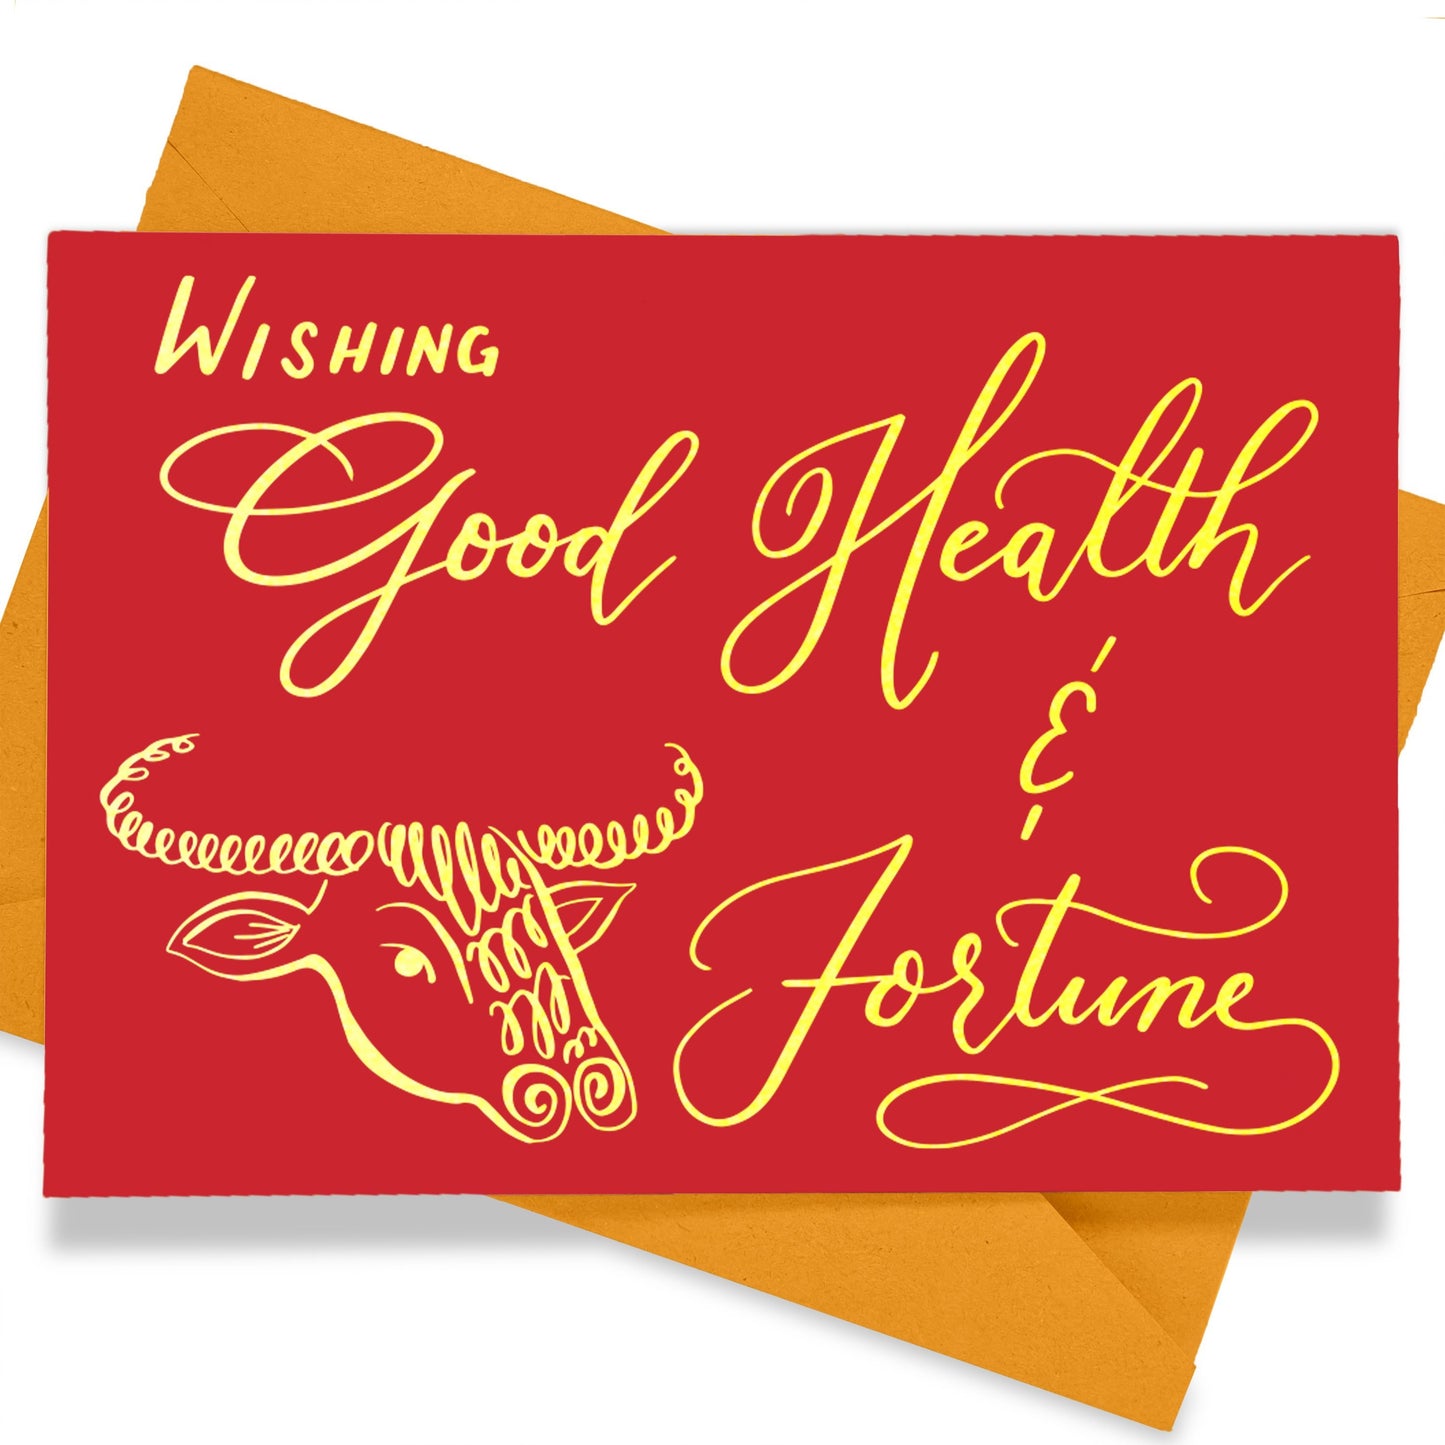 A thumbnail view of the greeting card: "Wishing Good Health & Fortune"